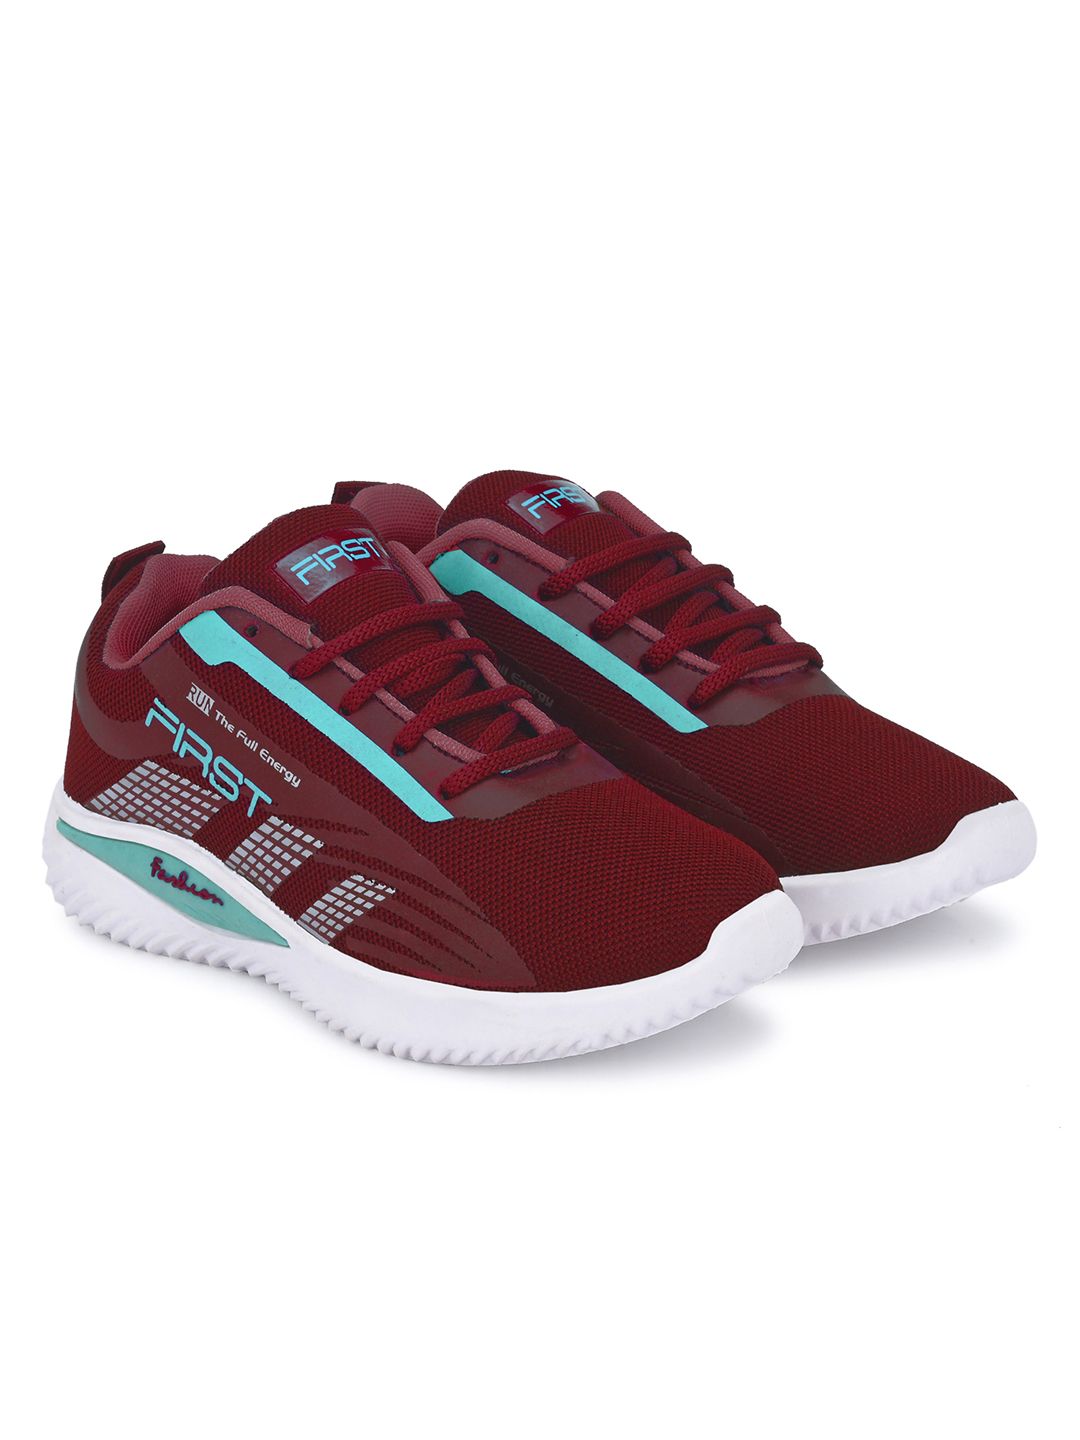 BIRDE Women Maroon & Turquoise Blue Printed Non-Marking Walking Shoes Price in India